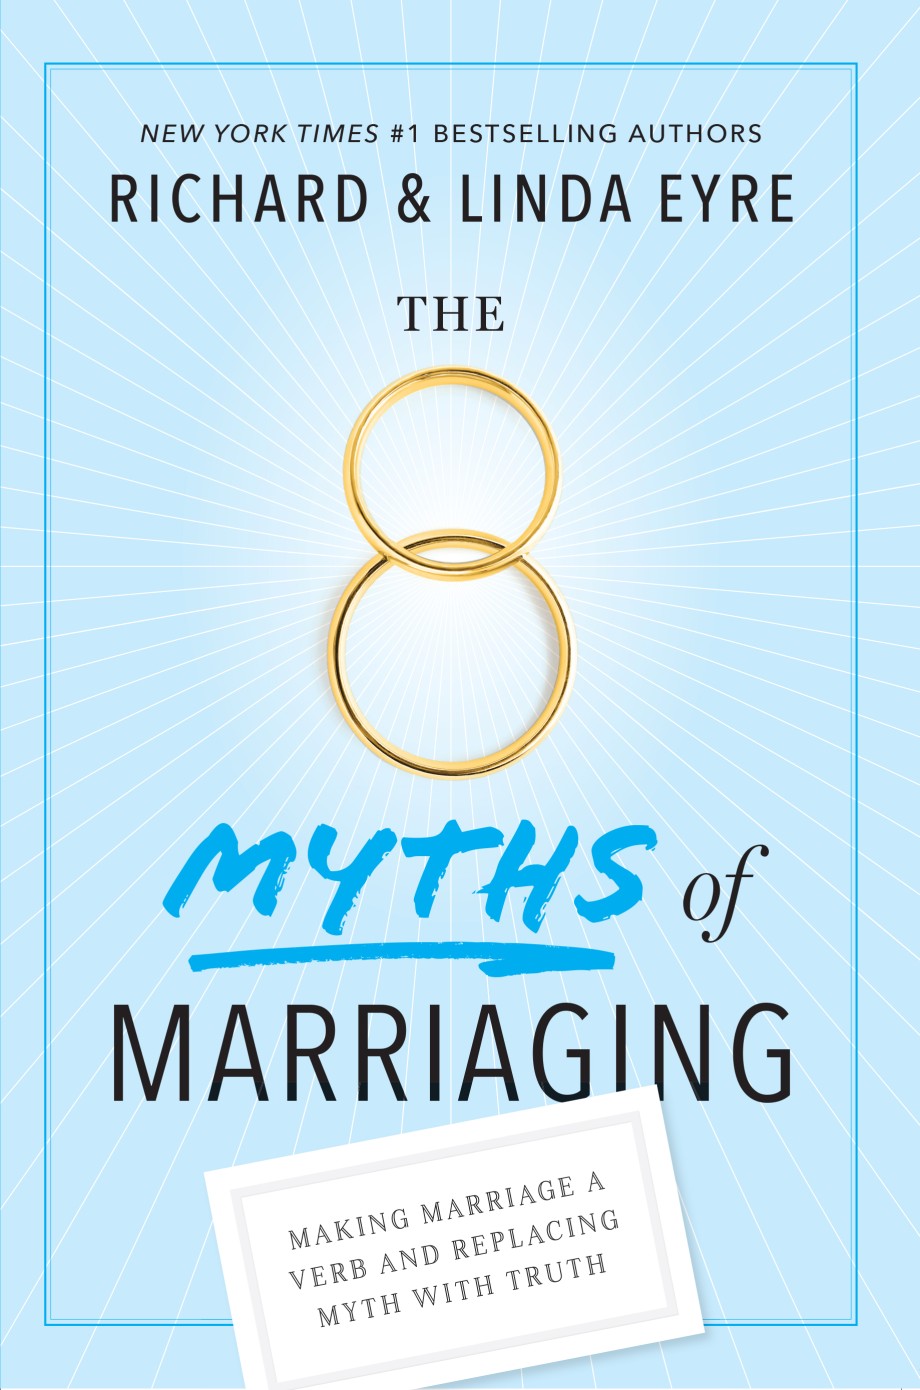 8 Myths of Marriaging Making Marriage a Verb and Replacing Myth with Truth